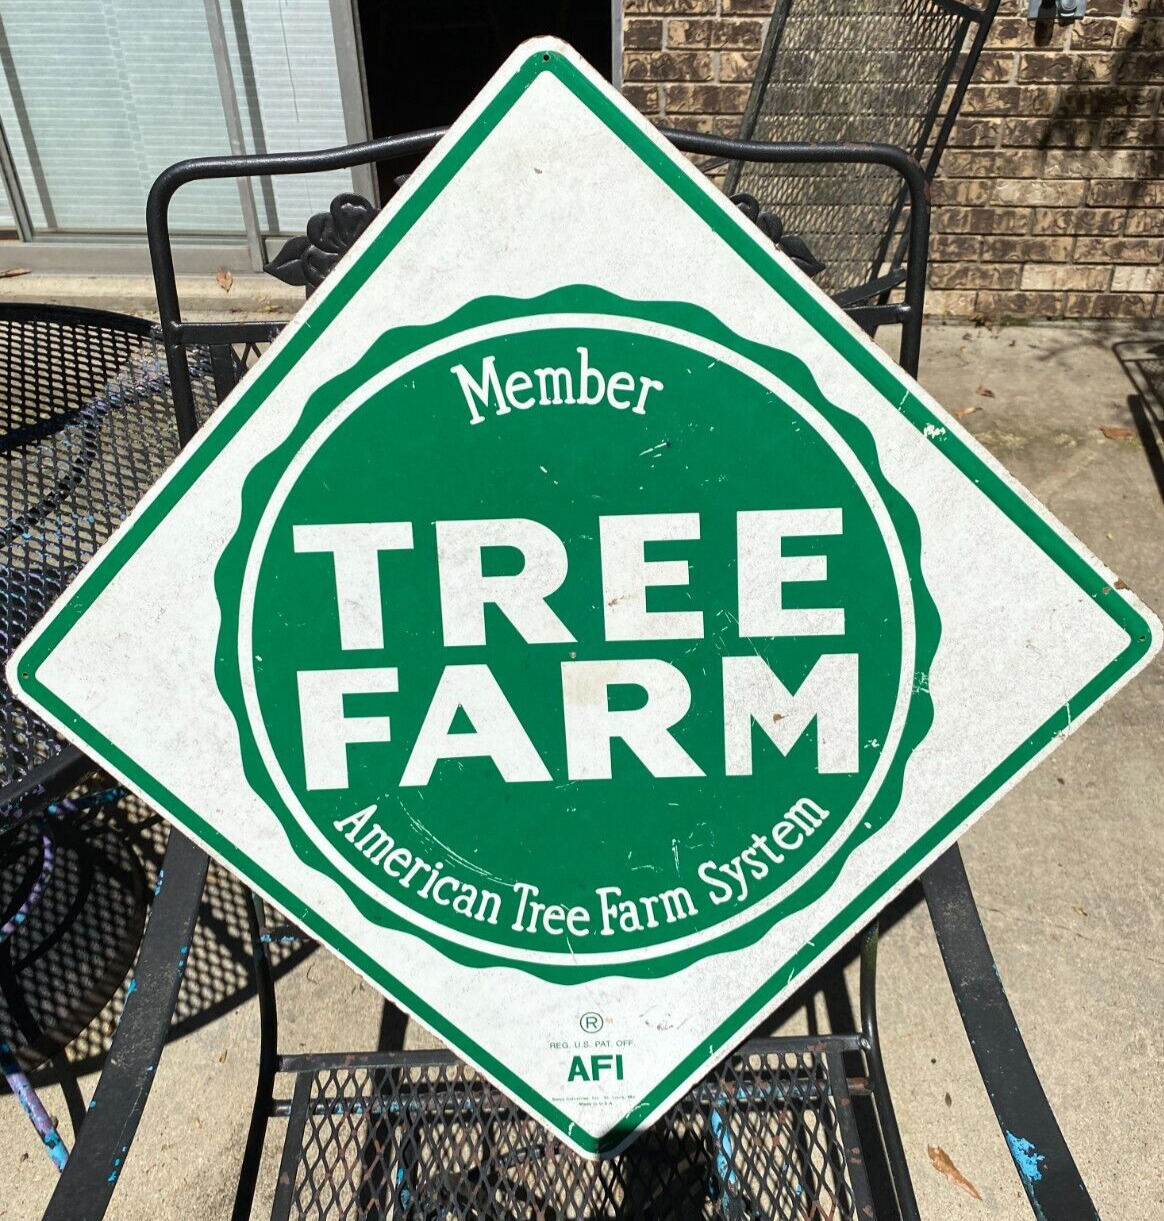 Vintage American Tree Farm System Member Composite Wood Sign by AFI 22”x22”